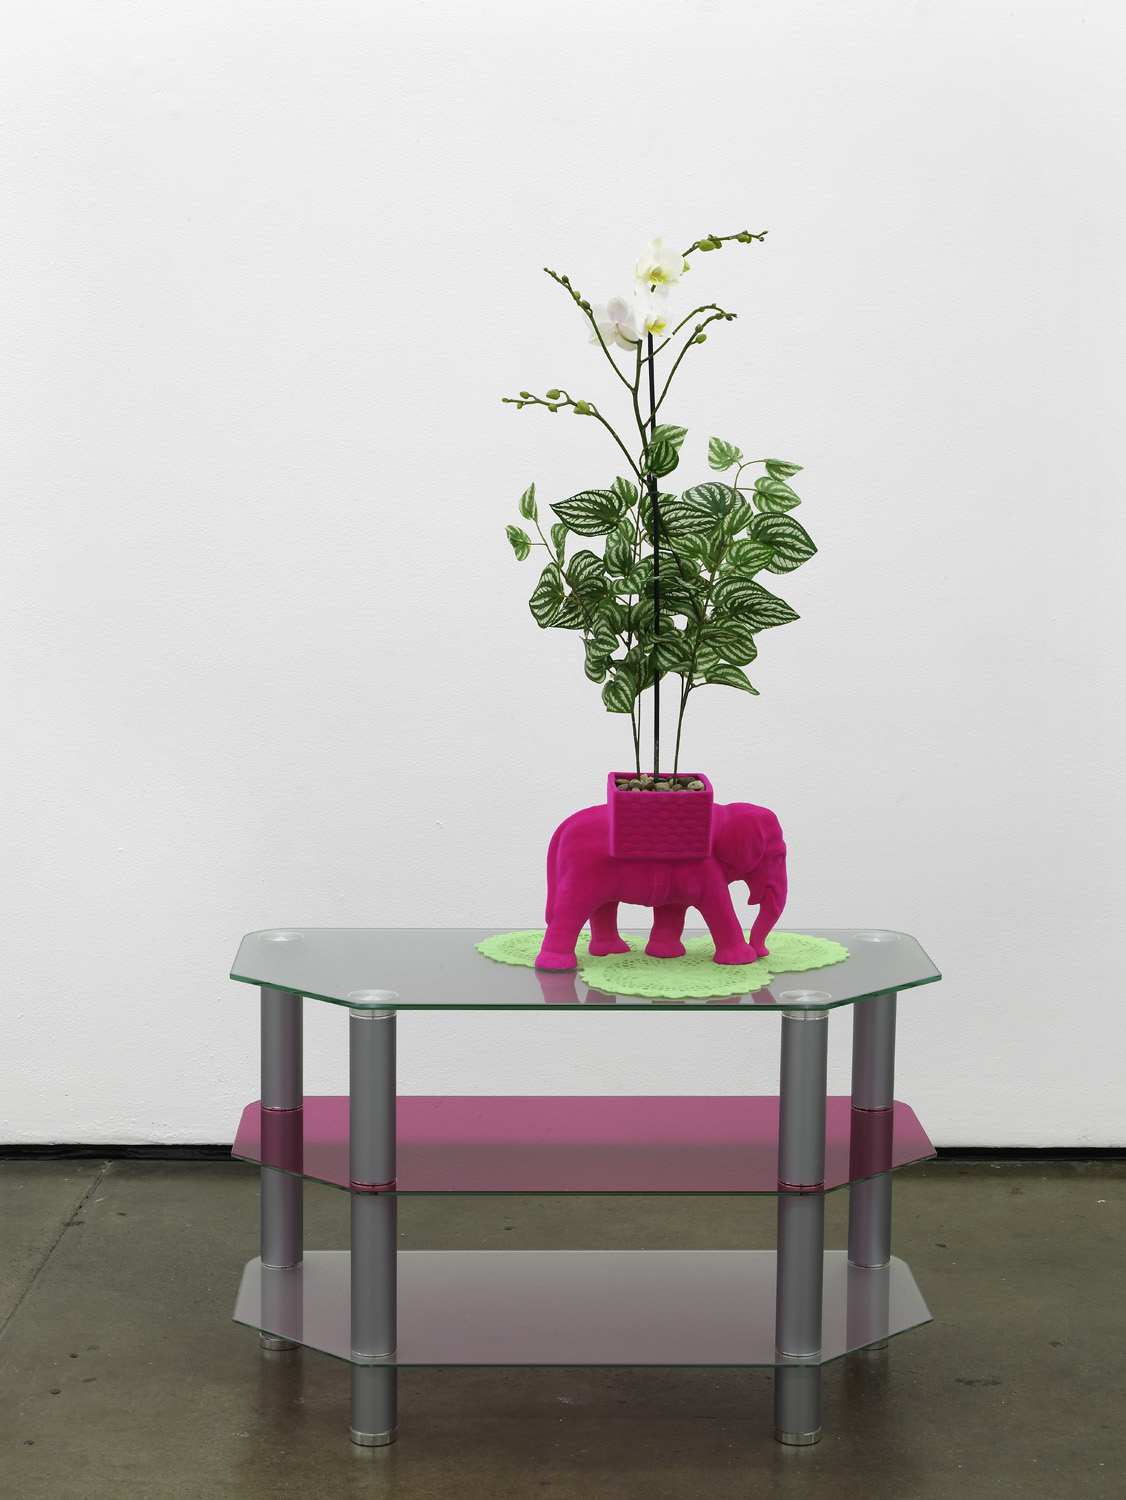     Matthew Darbyshire Untitled Homeware No. 14 2011 fuchsia flocked elephant planter, lime flocked doilies, artificial orchid, coloured glass gels, &nbsp;glass and steel support:&nbsp;140 x 80 x 40 cm 